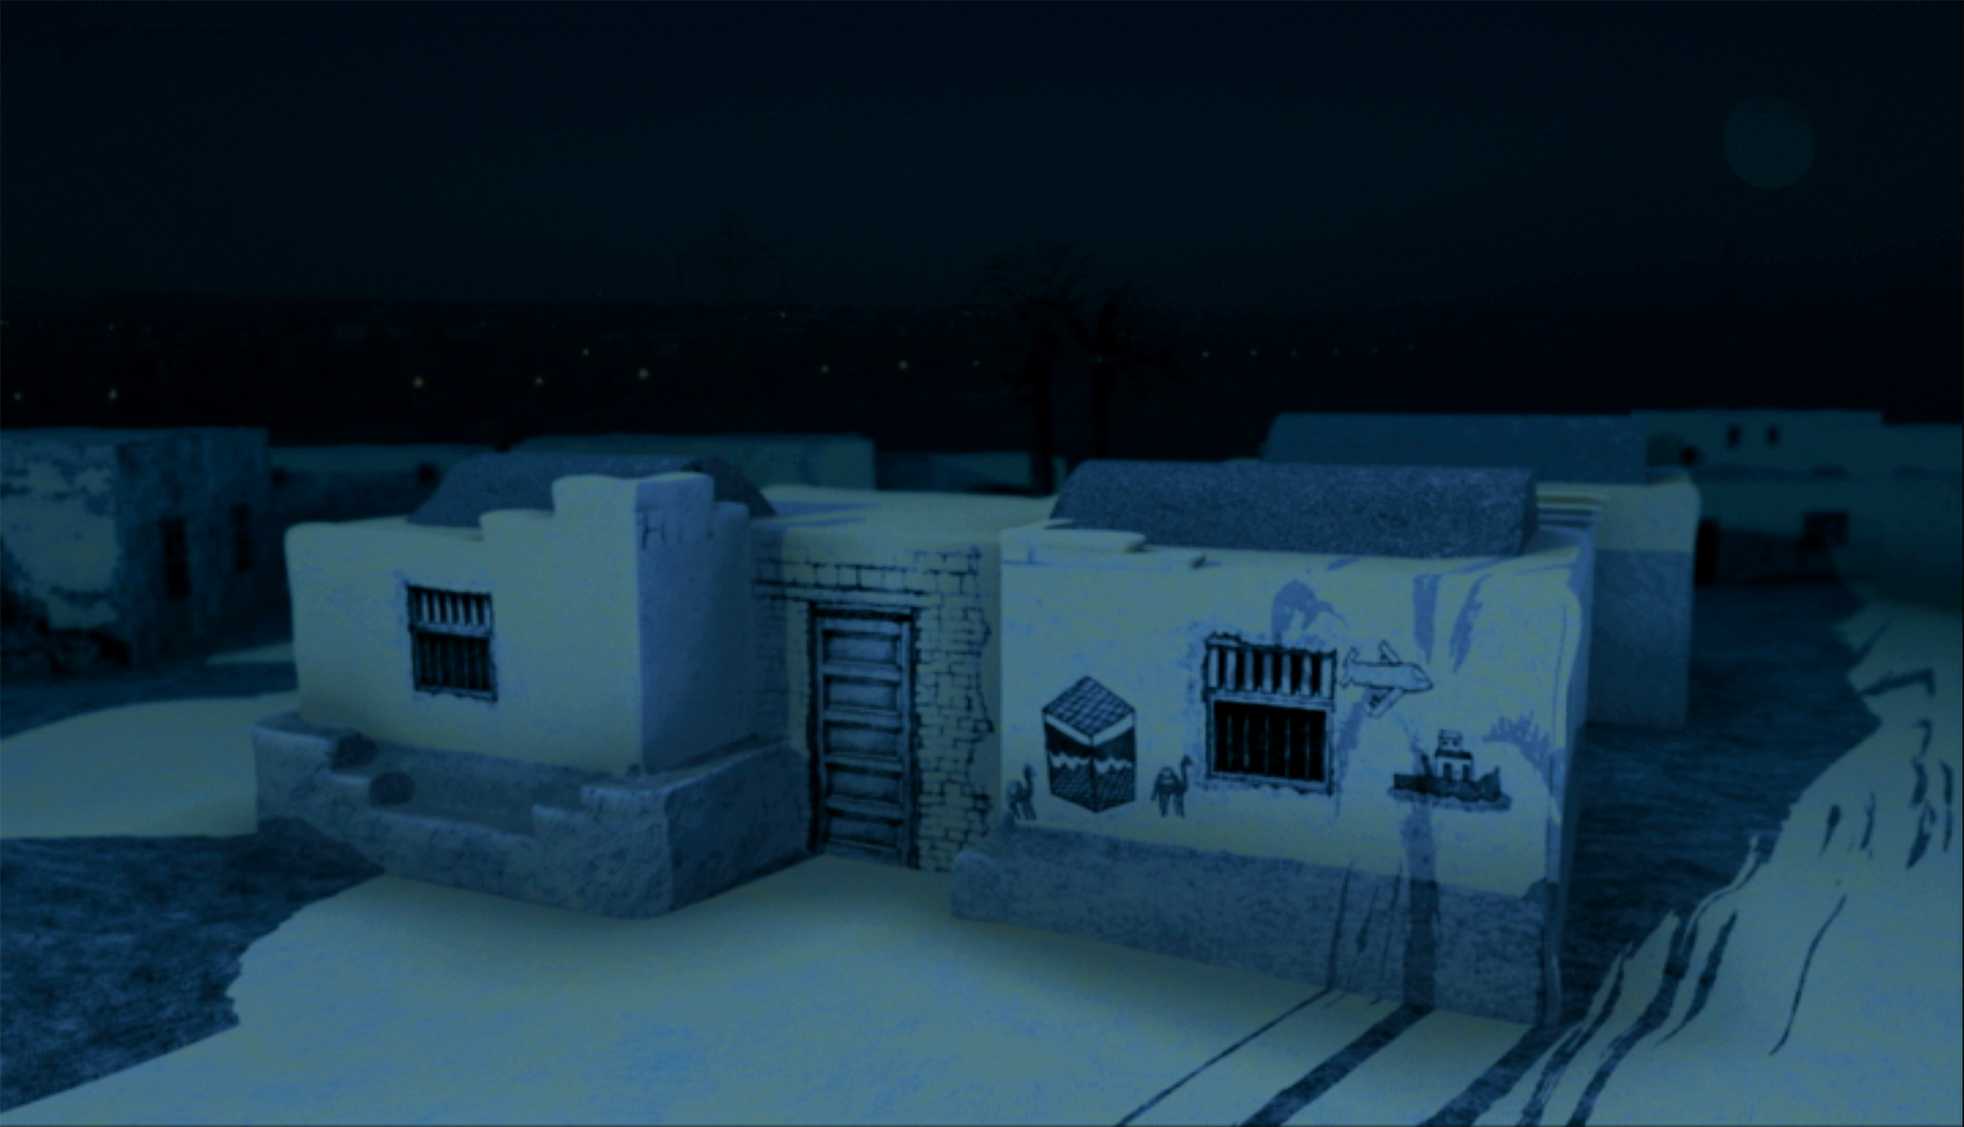 ‘Kaf El Amar’ – Film, Egypt  2011.

Still from the film’s animated title sequence. Original drawings applied to 3D
model.